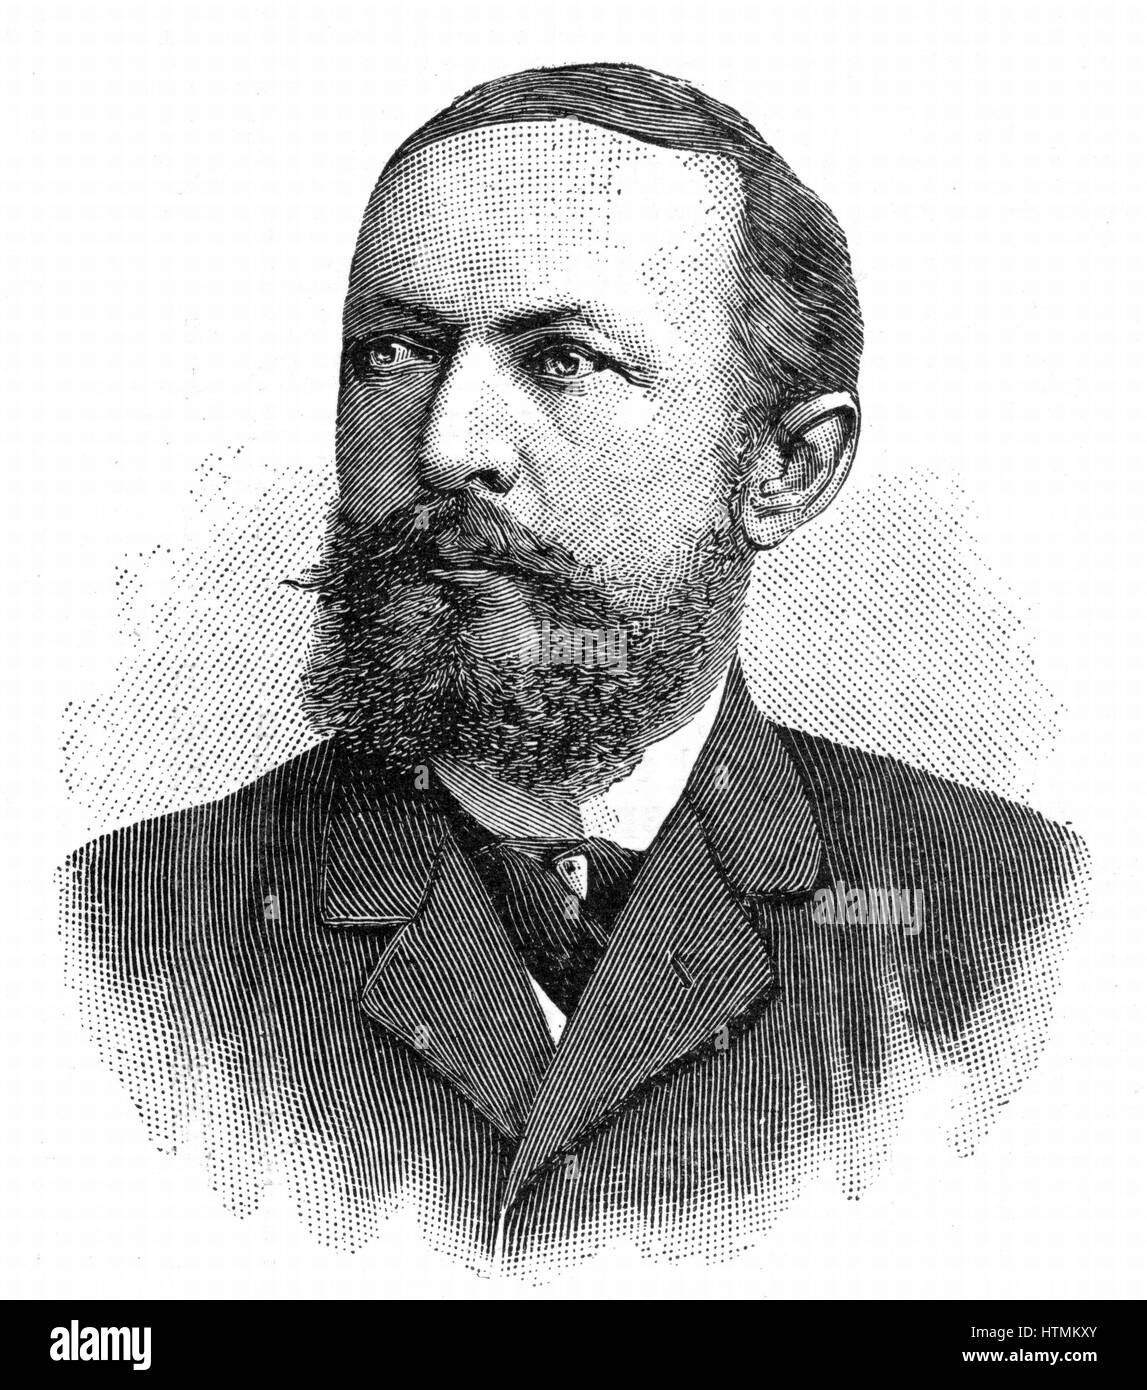 Emil von Behring (1854-1917) German immunologist and bacteriologist. Awarded first Nobel prize for physiology or medicine, 1901. Engraving, 1902 Stock Photo